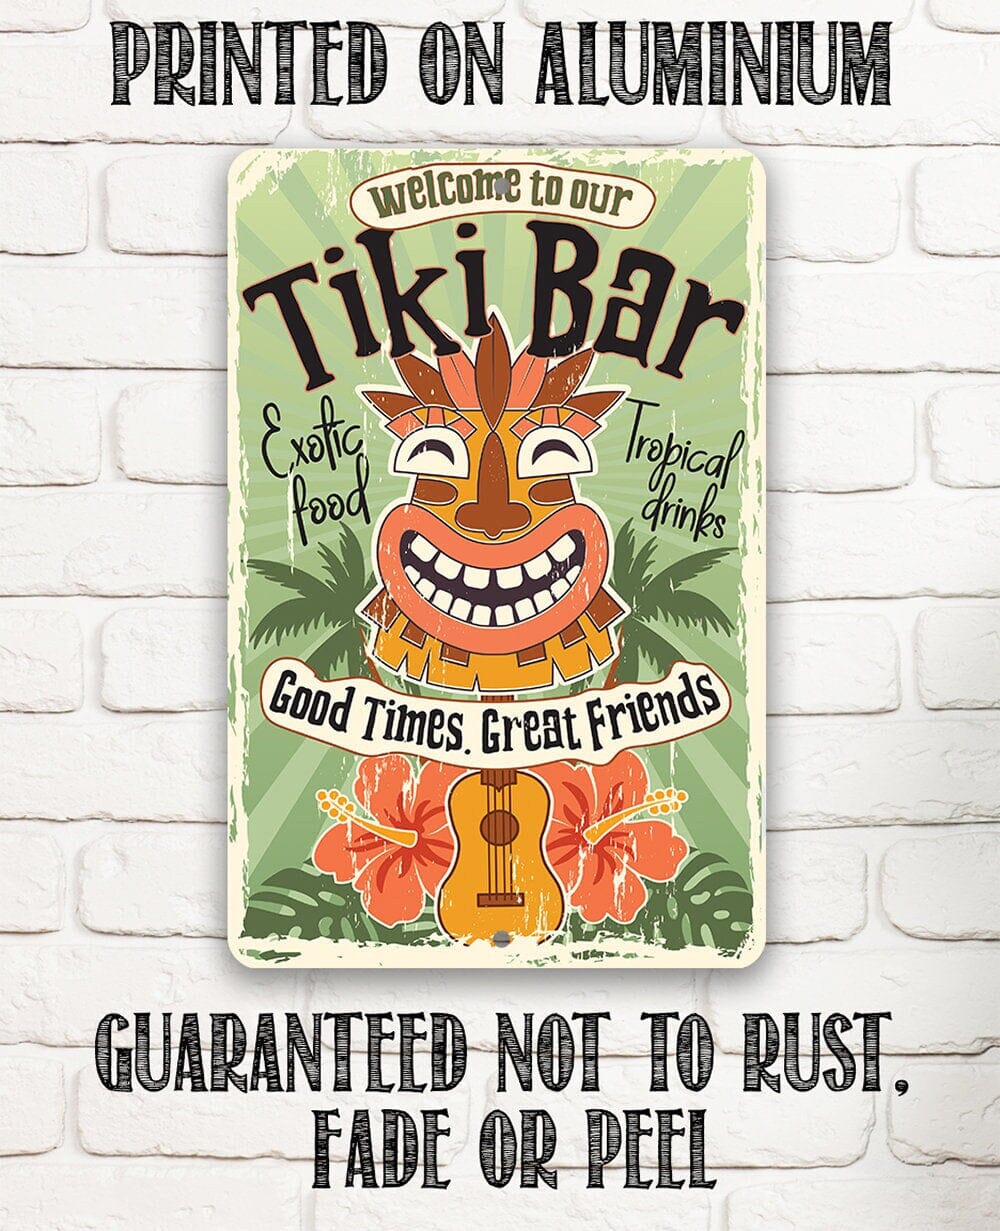 Welcome To Our Tiki Bar, Good Times Great Friends - 8" x 12" or 12" x 18" Aluminum Tin Awesome Metal Poster Lone Star Art 